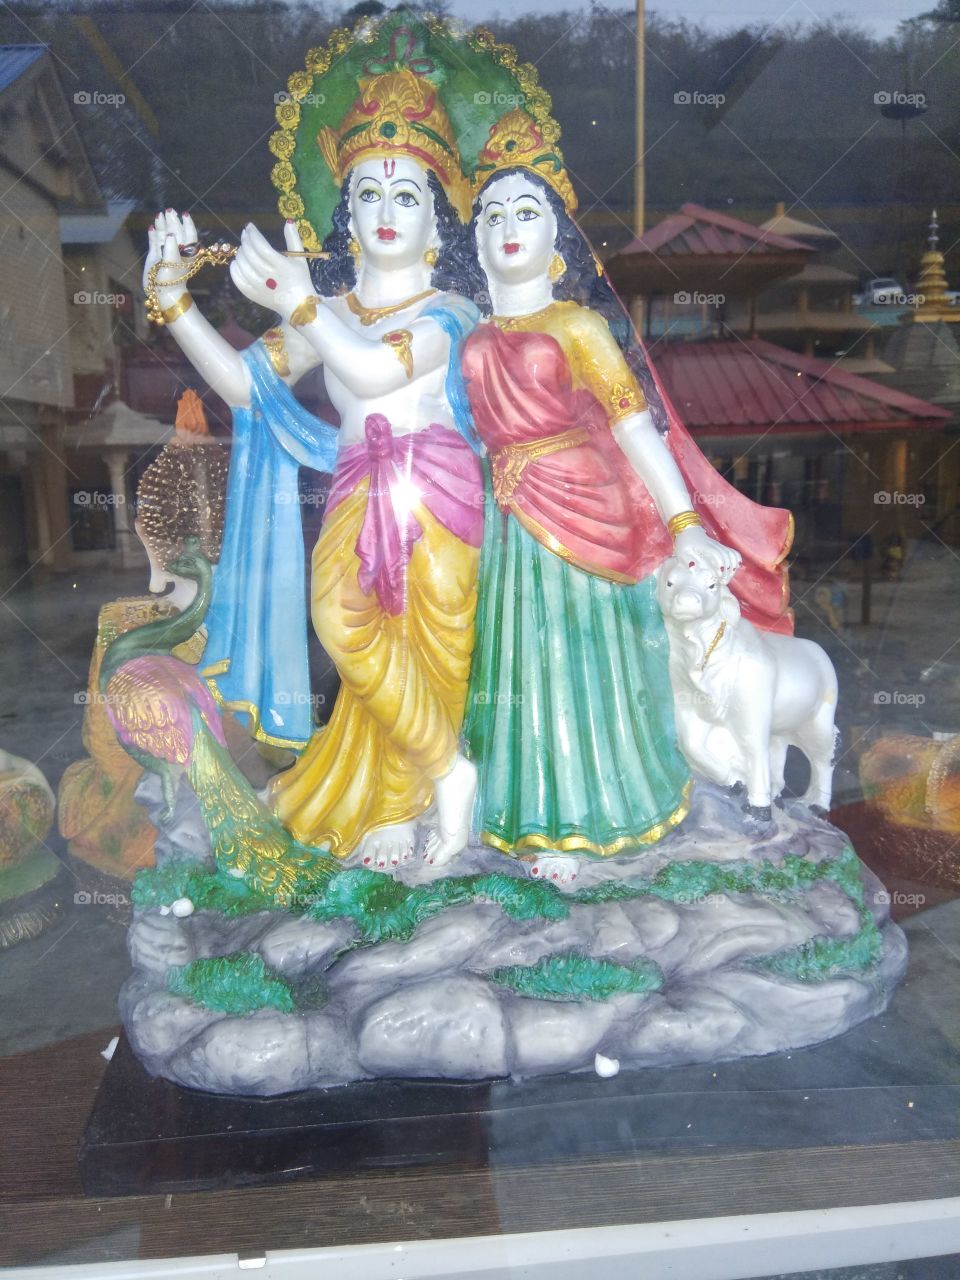 The Lord Radha-Kirshna is known fir their love towards each other, having different colour (skin). The Lord Krishna is black in colour while Radha is white in colour and very beautiful. Today as well these are worshipped by Indian Hindus